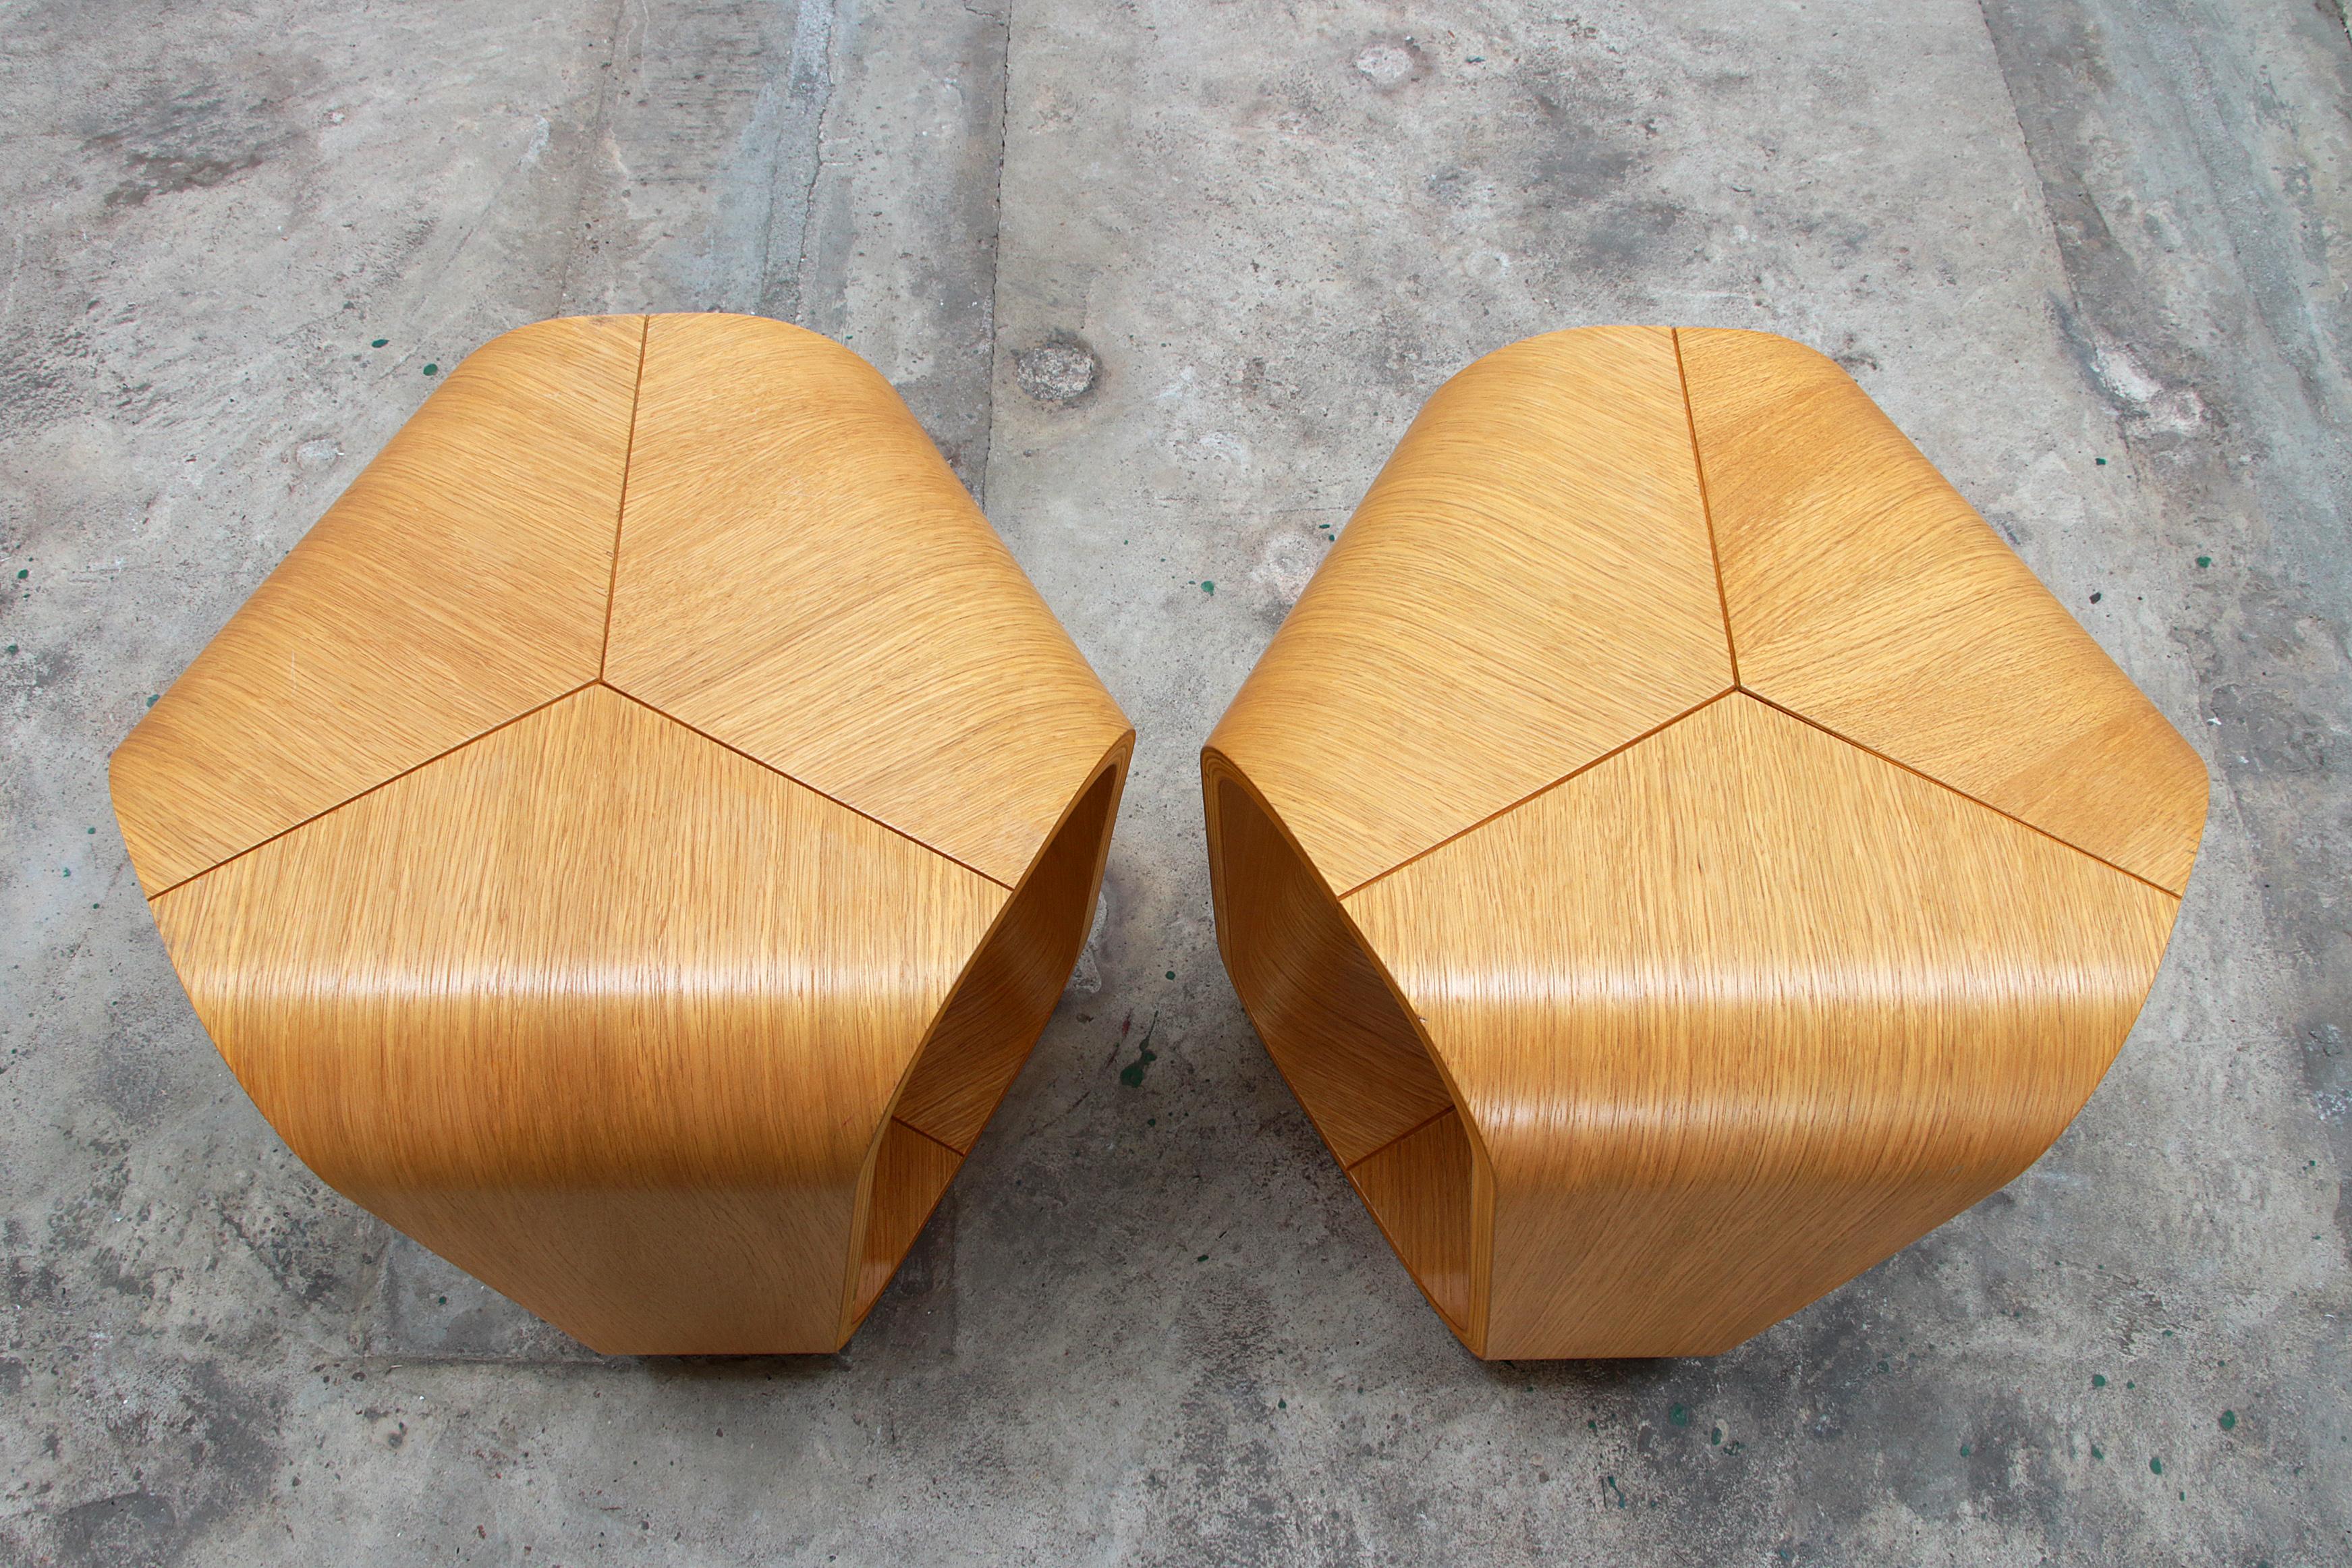 Plywood Enrico Cesana by Busnelli  side tables  1990 Italy.